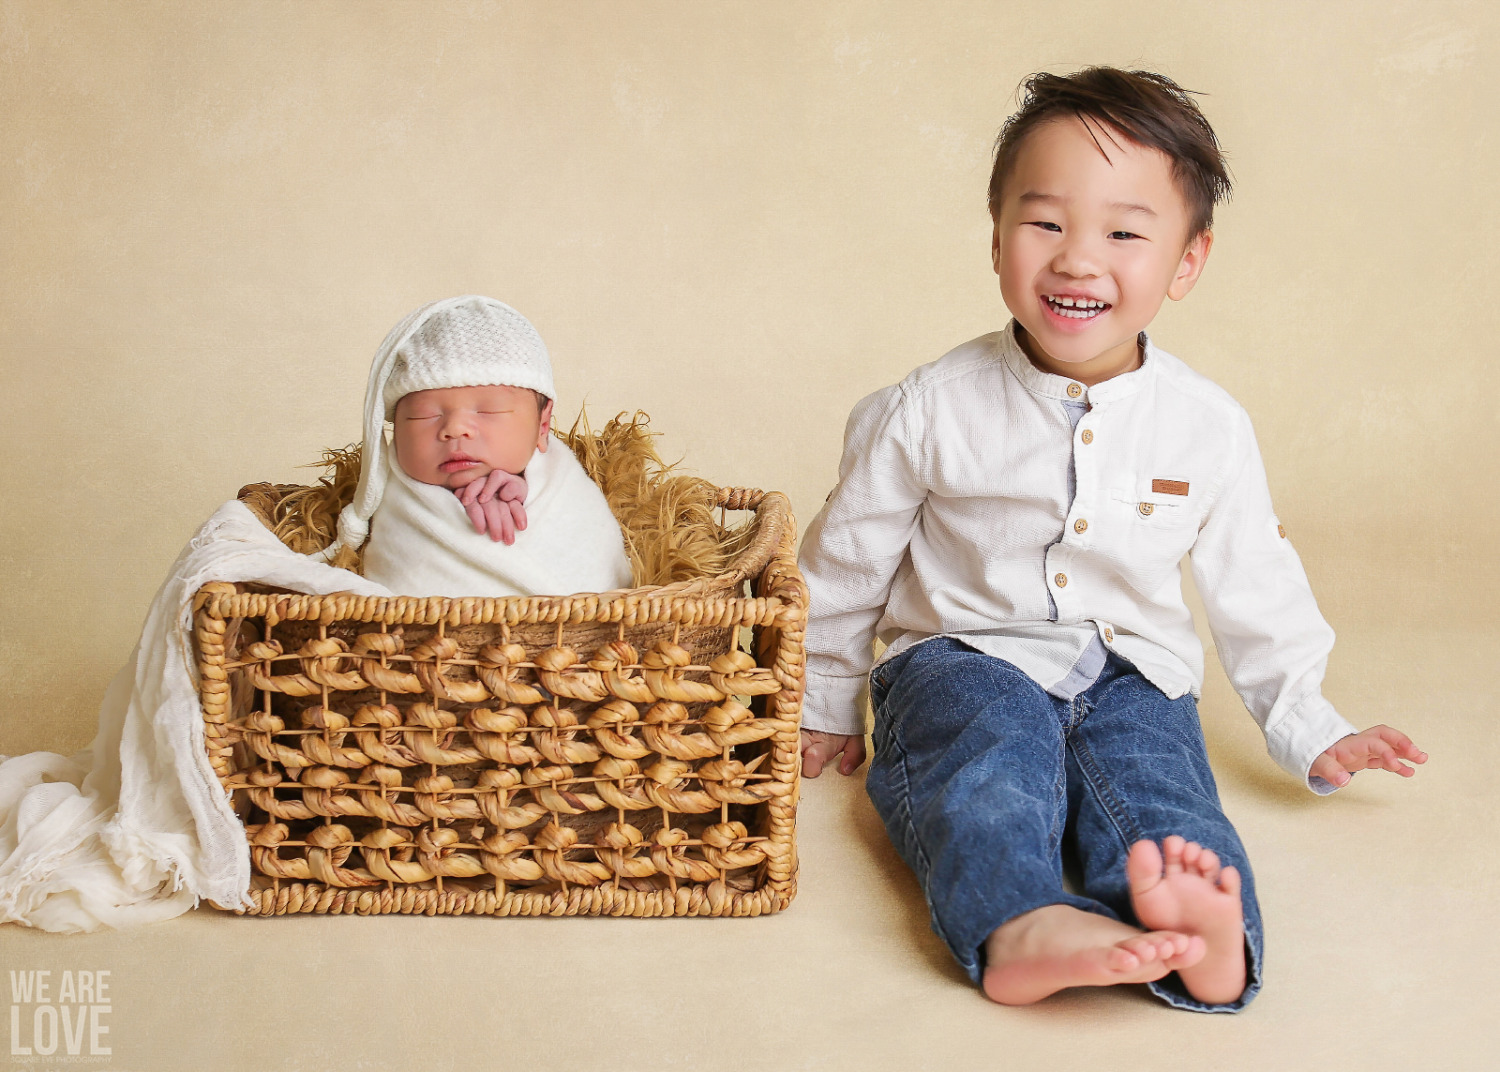 newborn baby with brother on tan background